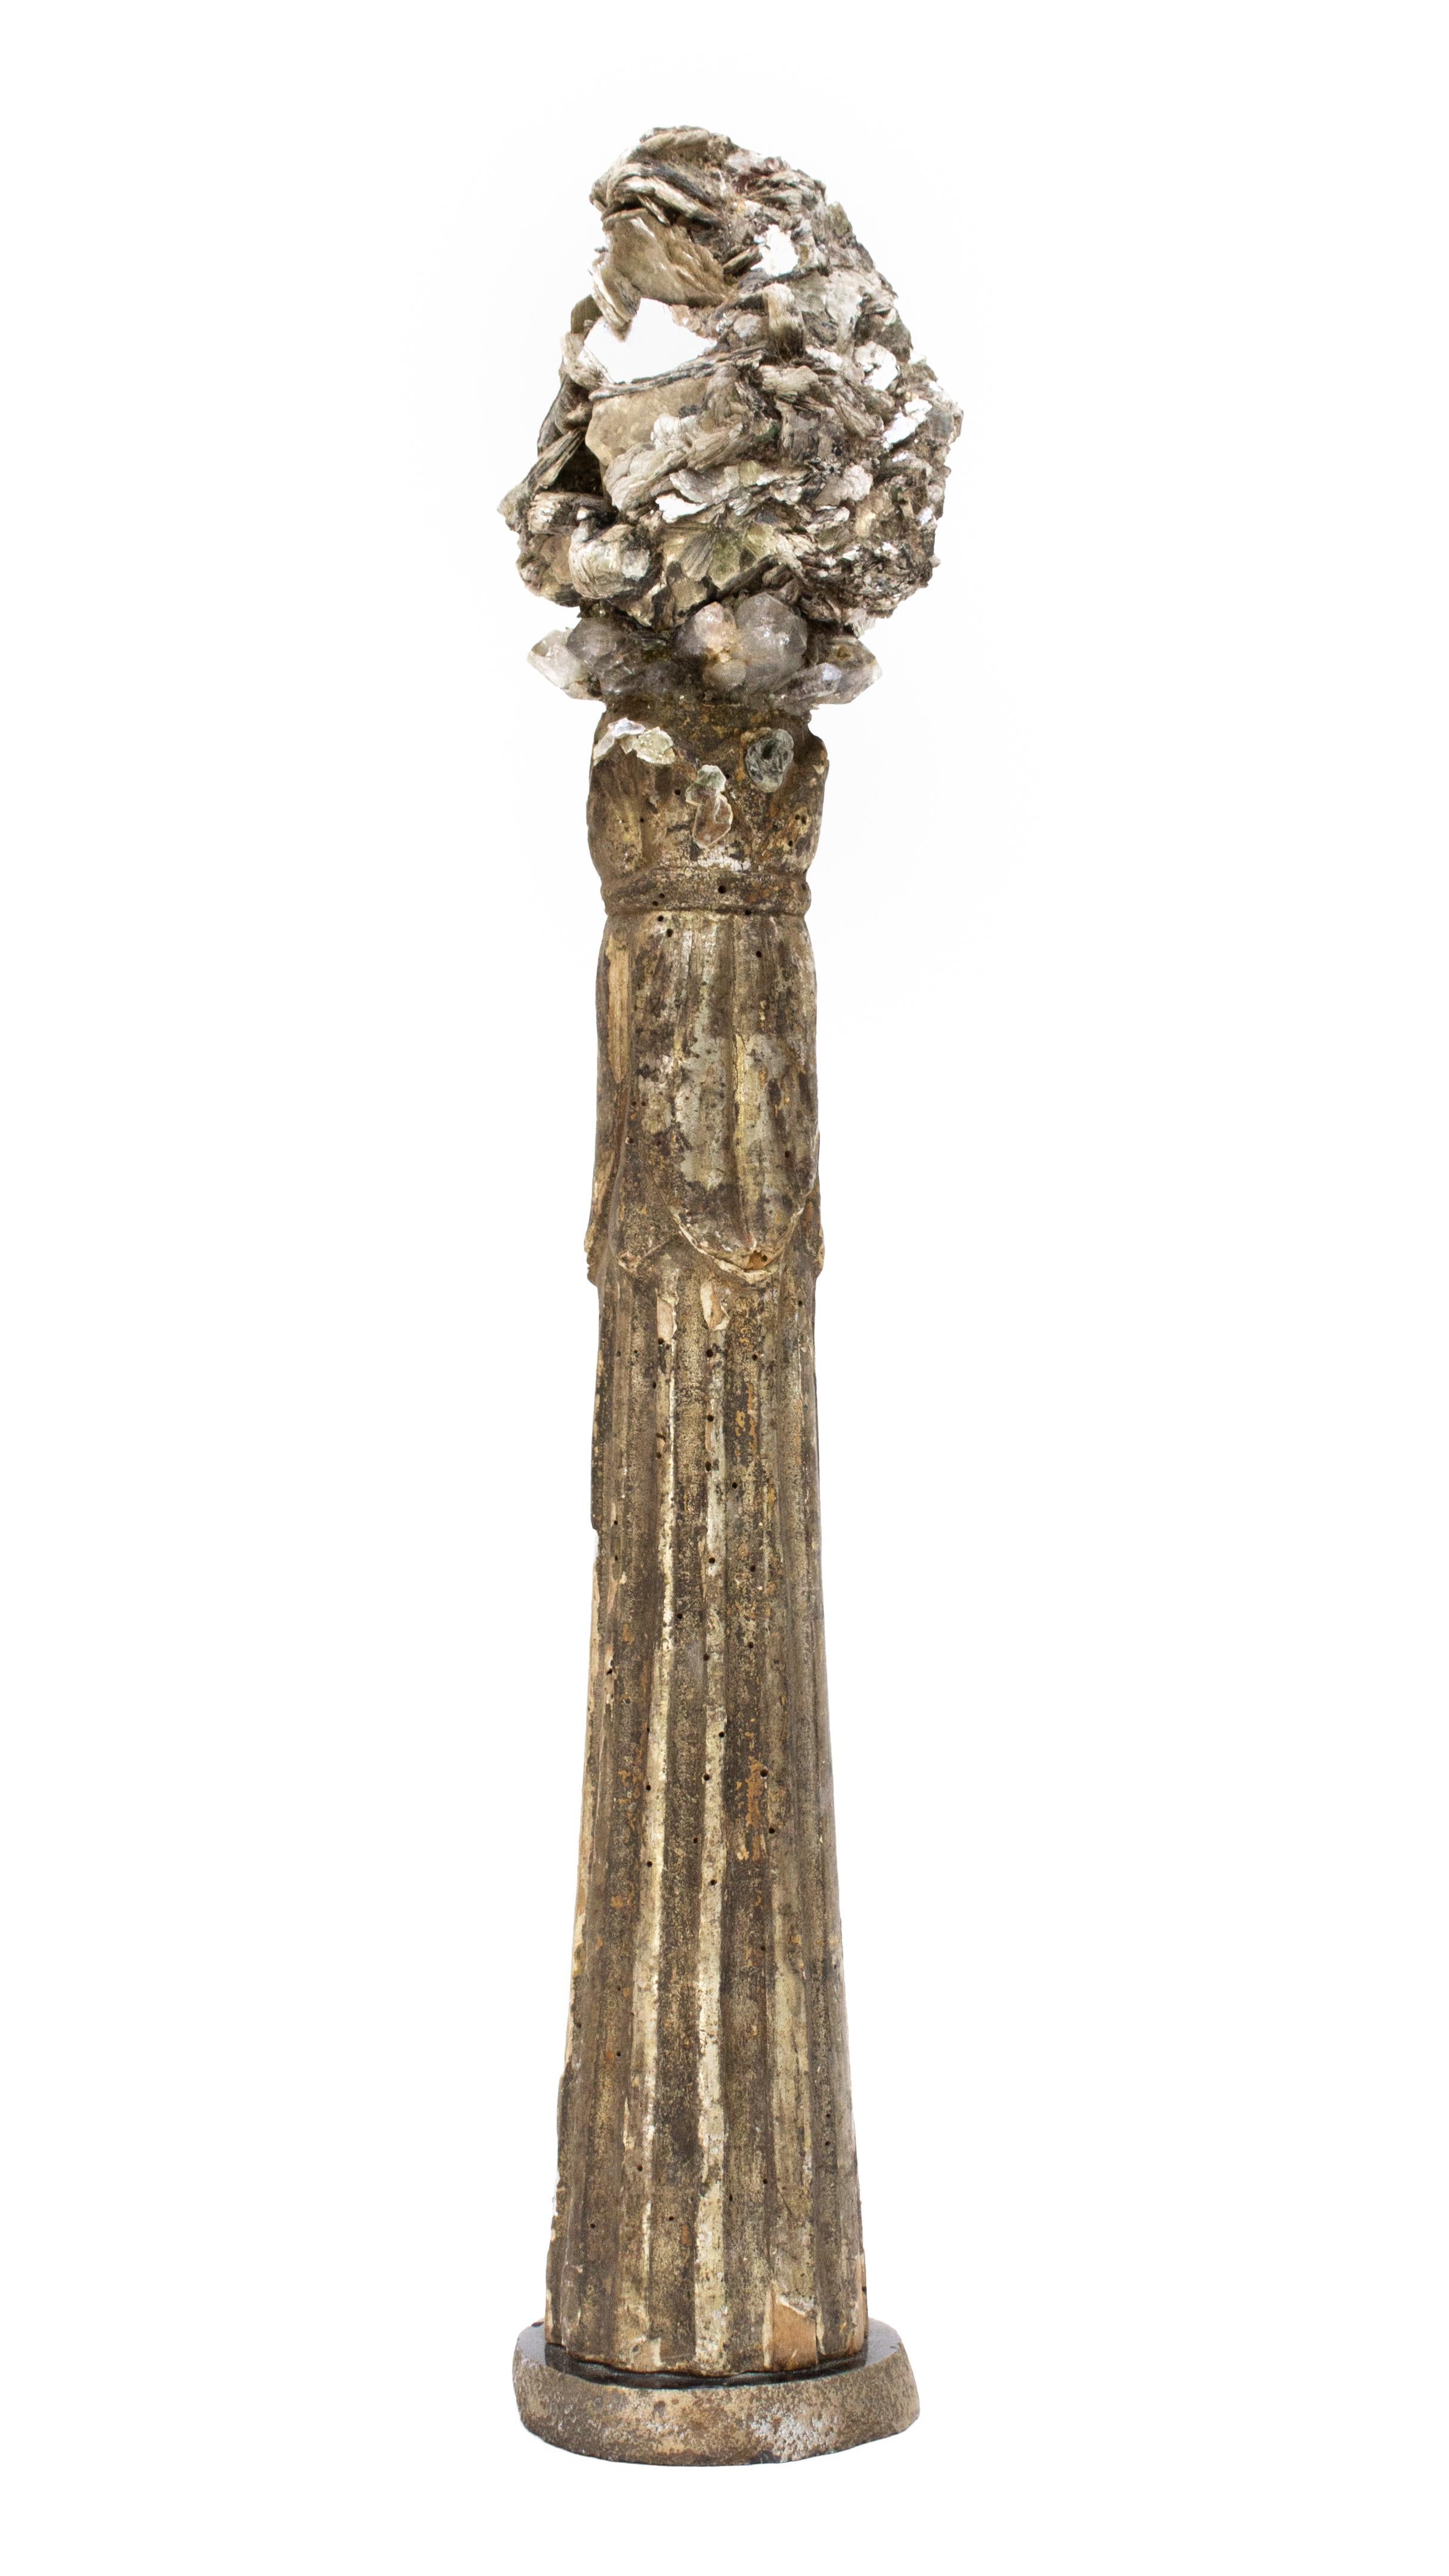 Sculptural 18th century Italian fragment decorated with mica and crystal quartz points on a polished agate base. The 18th century fragment originally came from a candlestick in a historical church in Italy.

The piece is put together by Jean